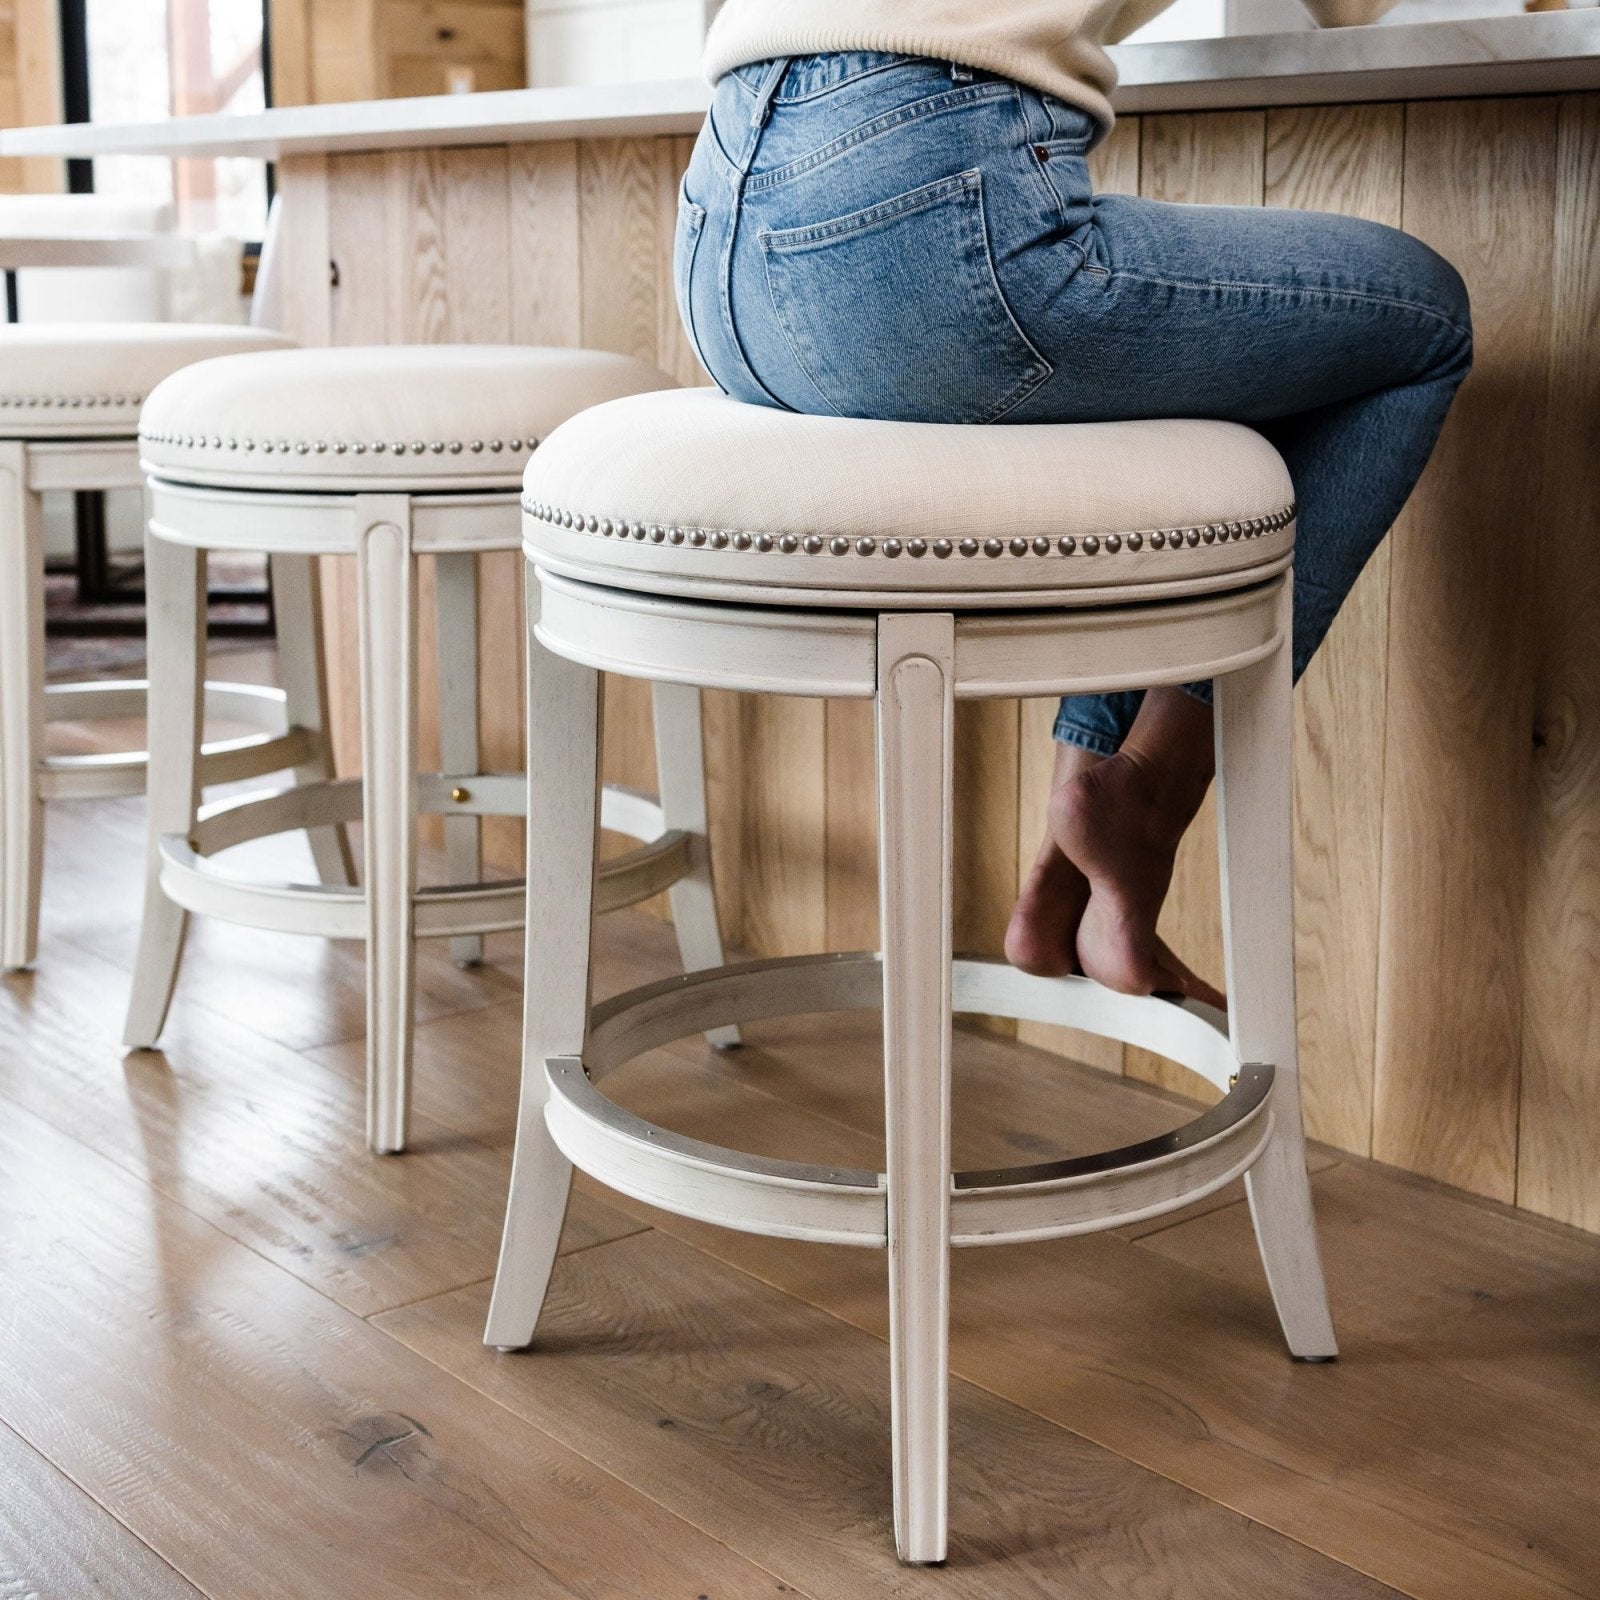 Alexander Backless Bar Stool in White Oak Finish with Natural Color Fabric Upholstery in Stools by Maven Lane